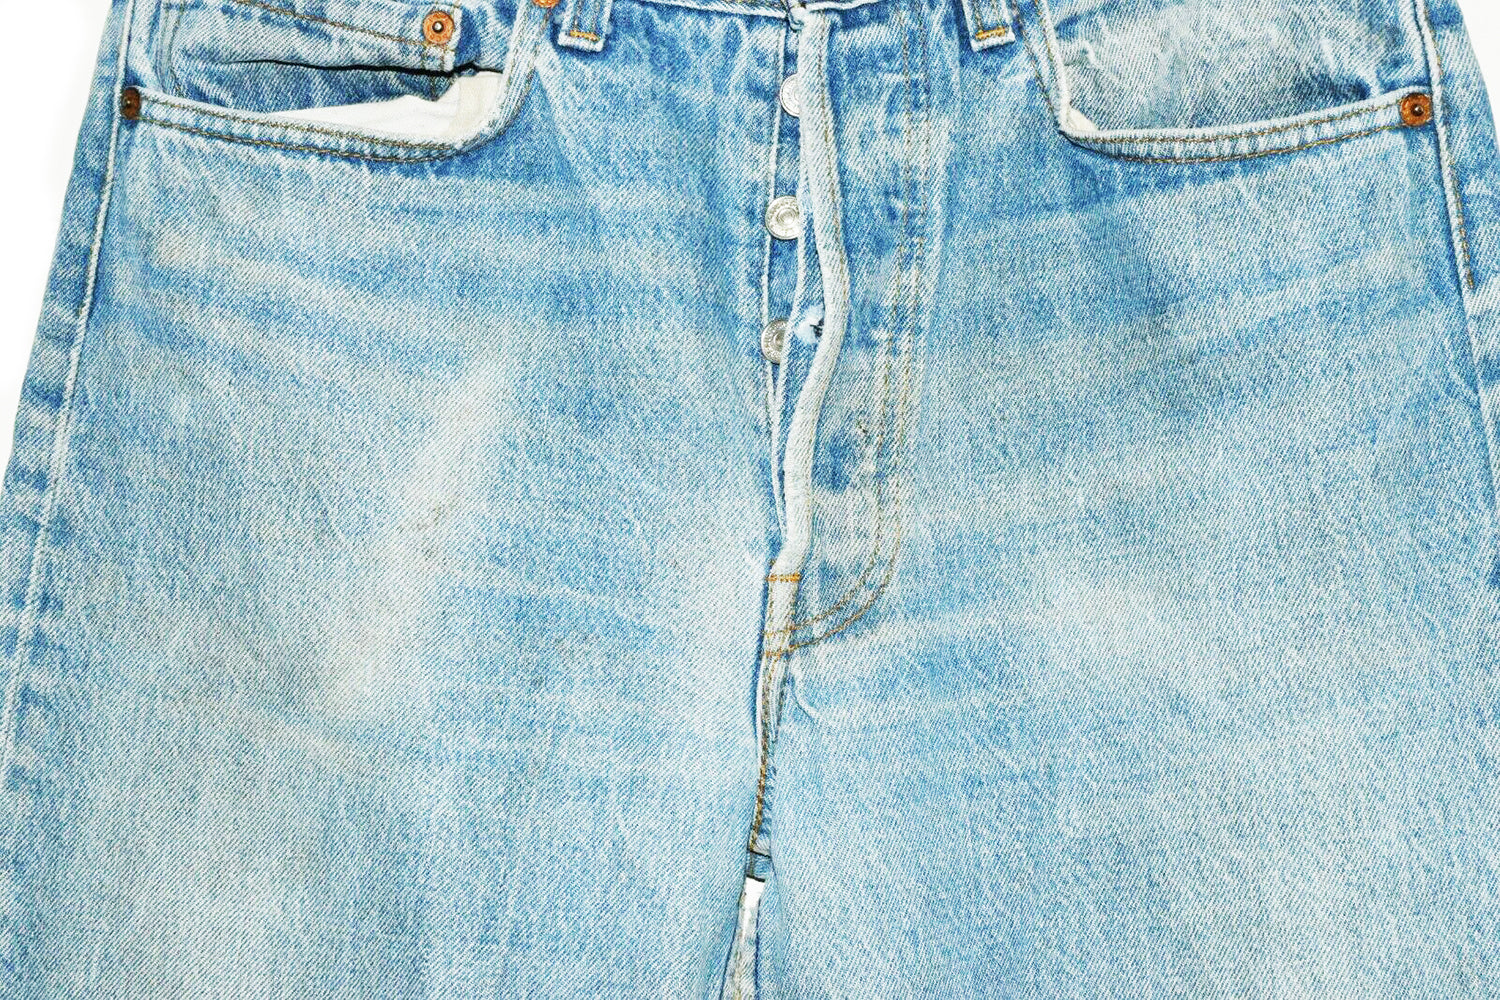 levis with button back pockets